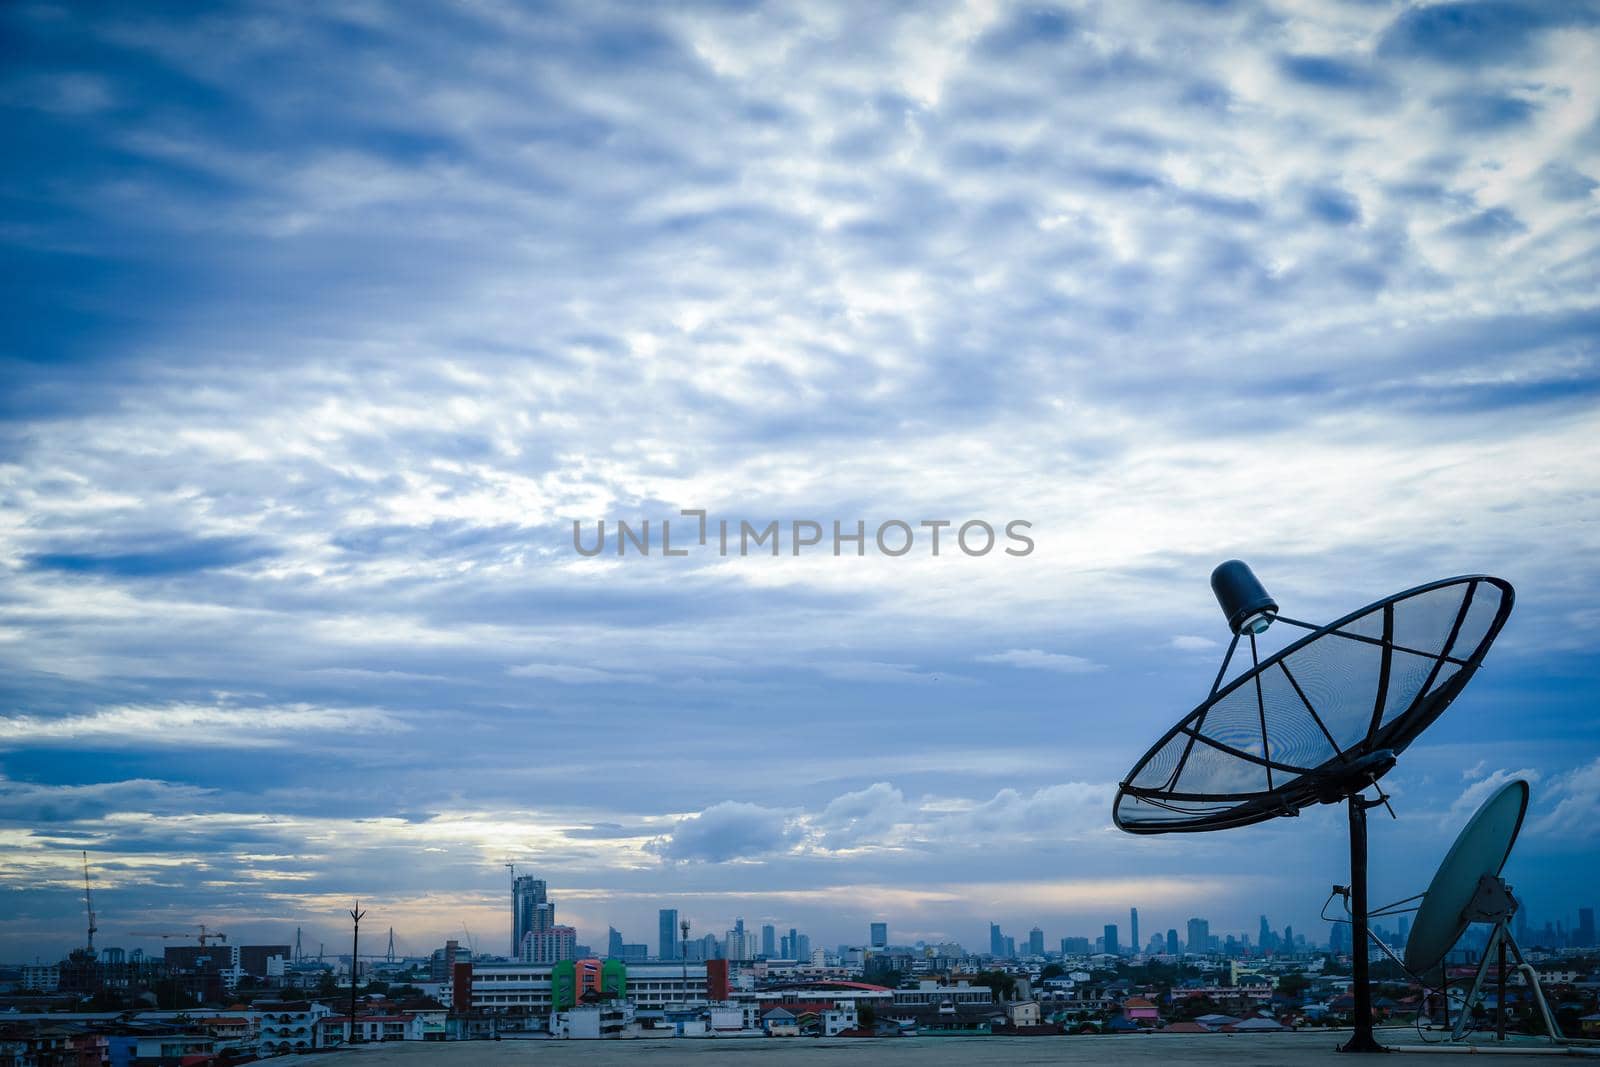 Satellite dish antenna on top of the building in urban area at morning